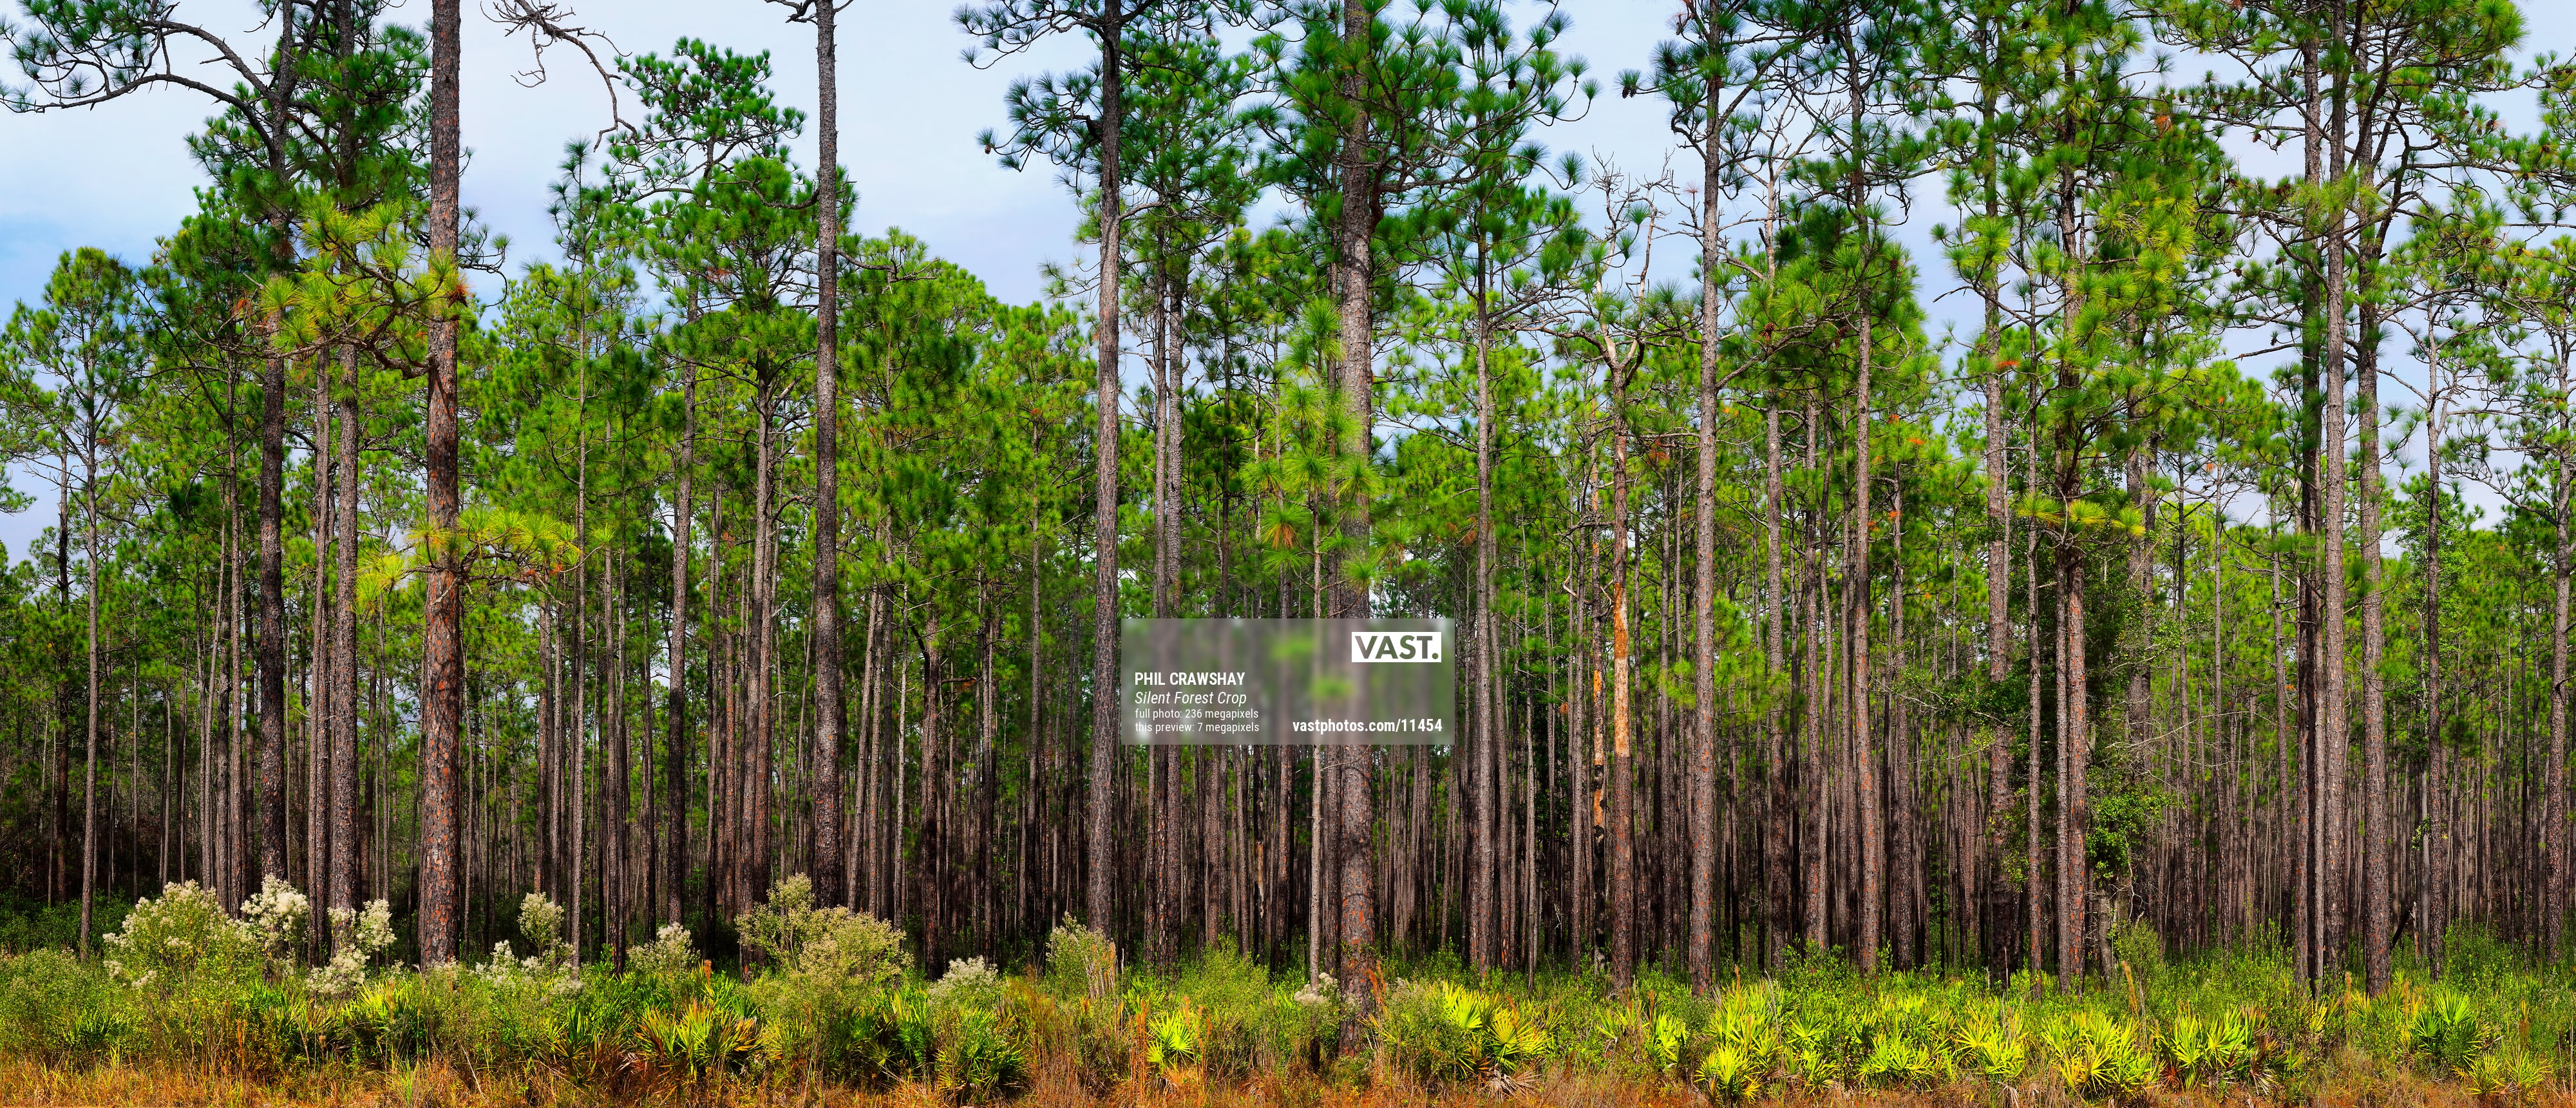 Photos of Florida pine tree forests - VAST